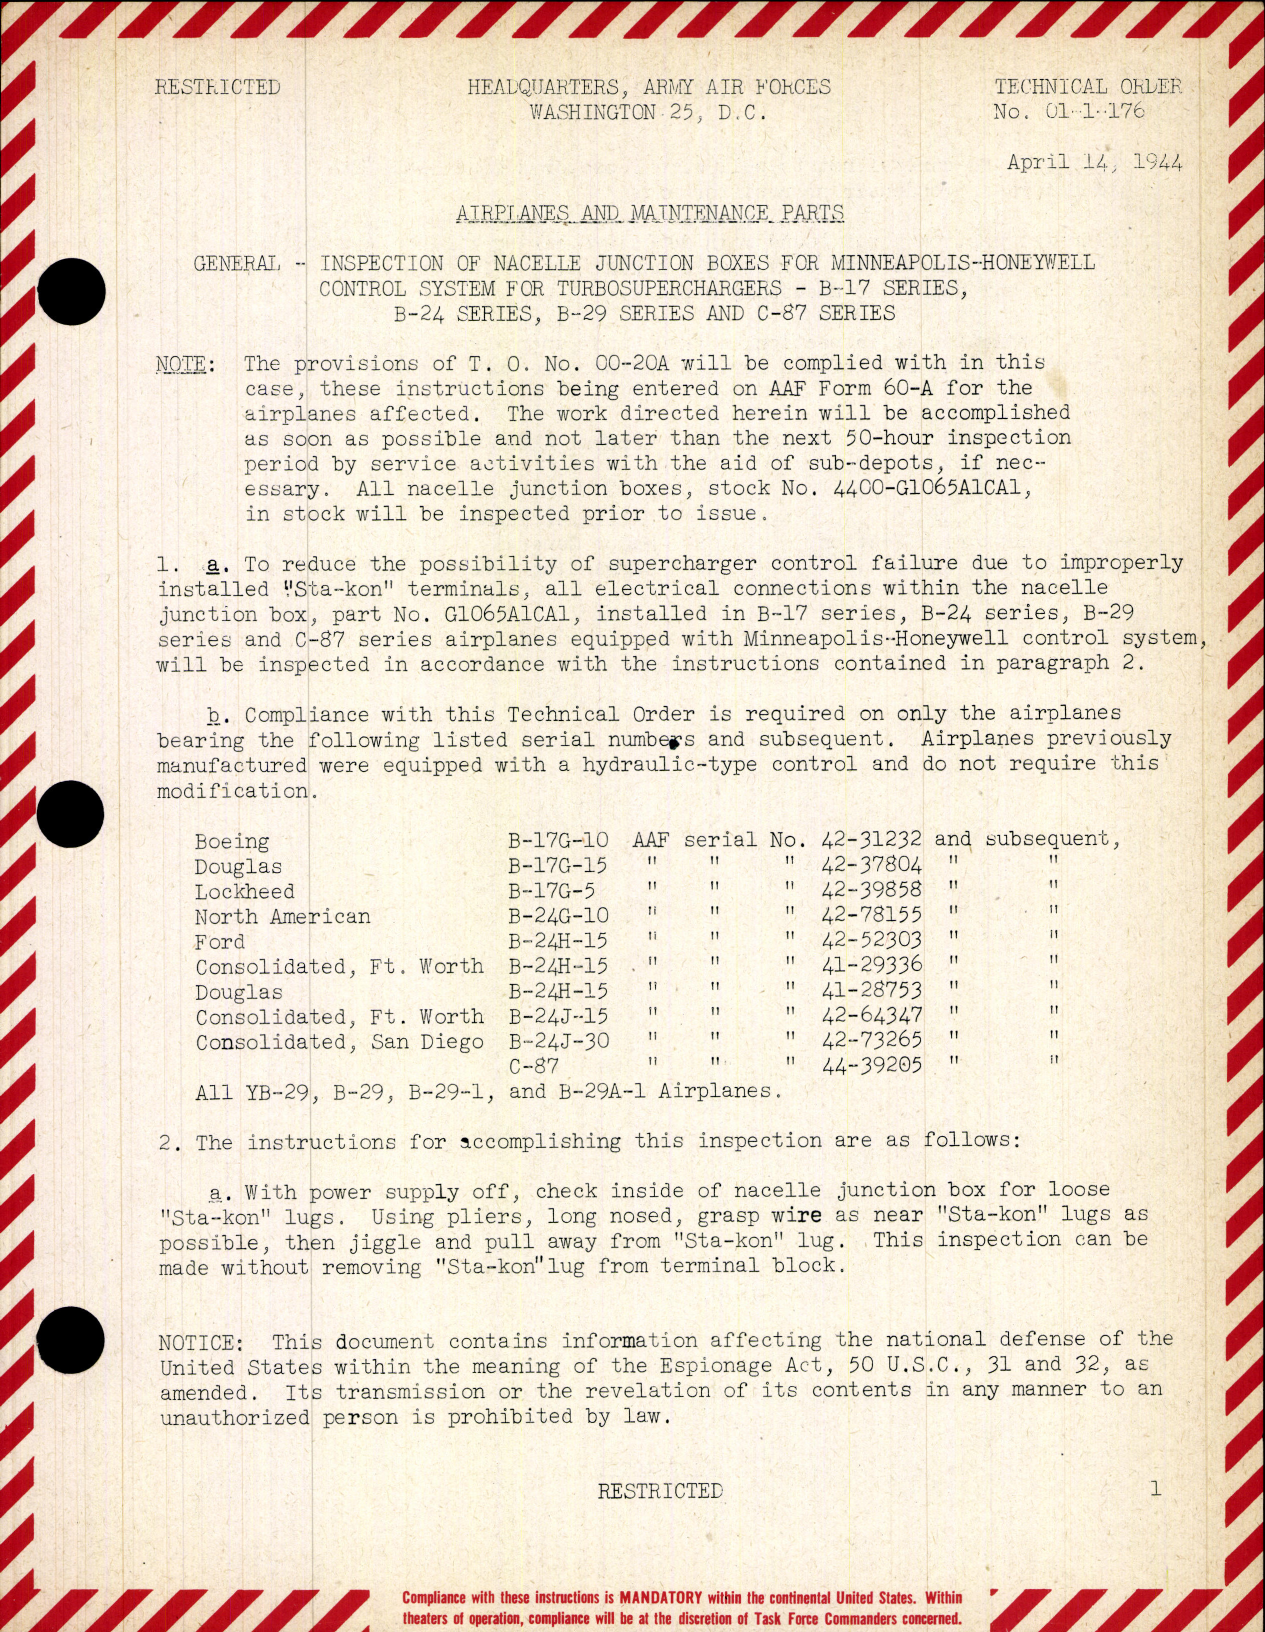 Sample page 1 from AirCorps Library document: Inspection of Nacelle Junction Boxes for Minneapolis-Honeywell Control System for Turbosuperchargers 